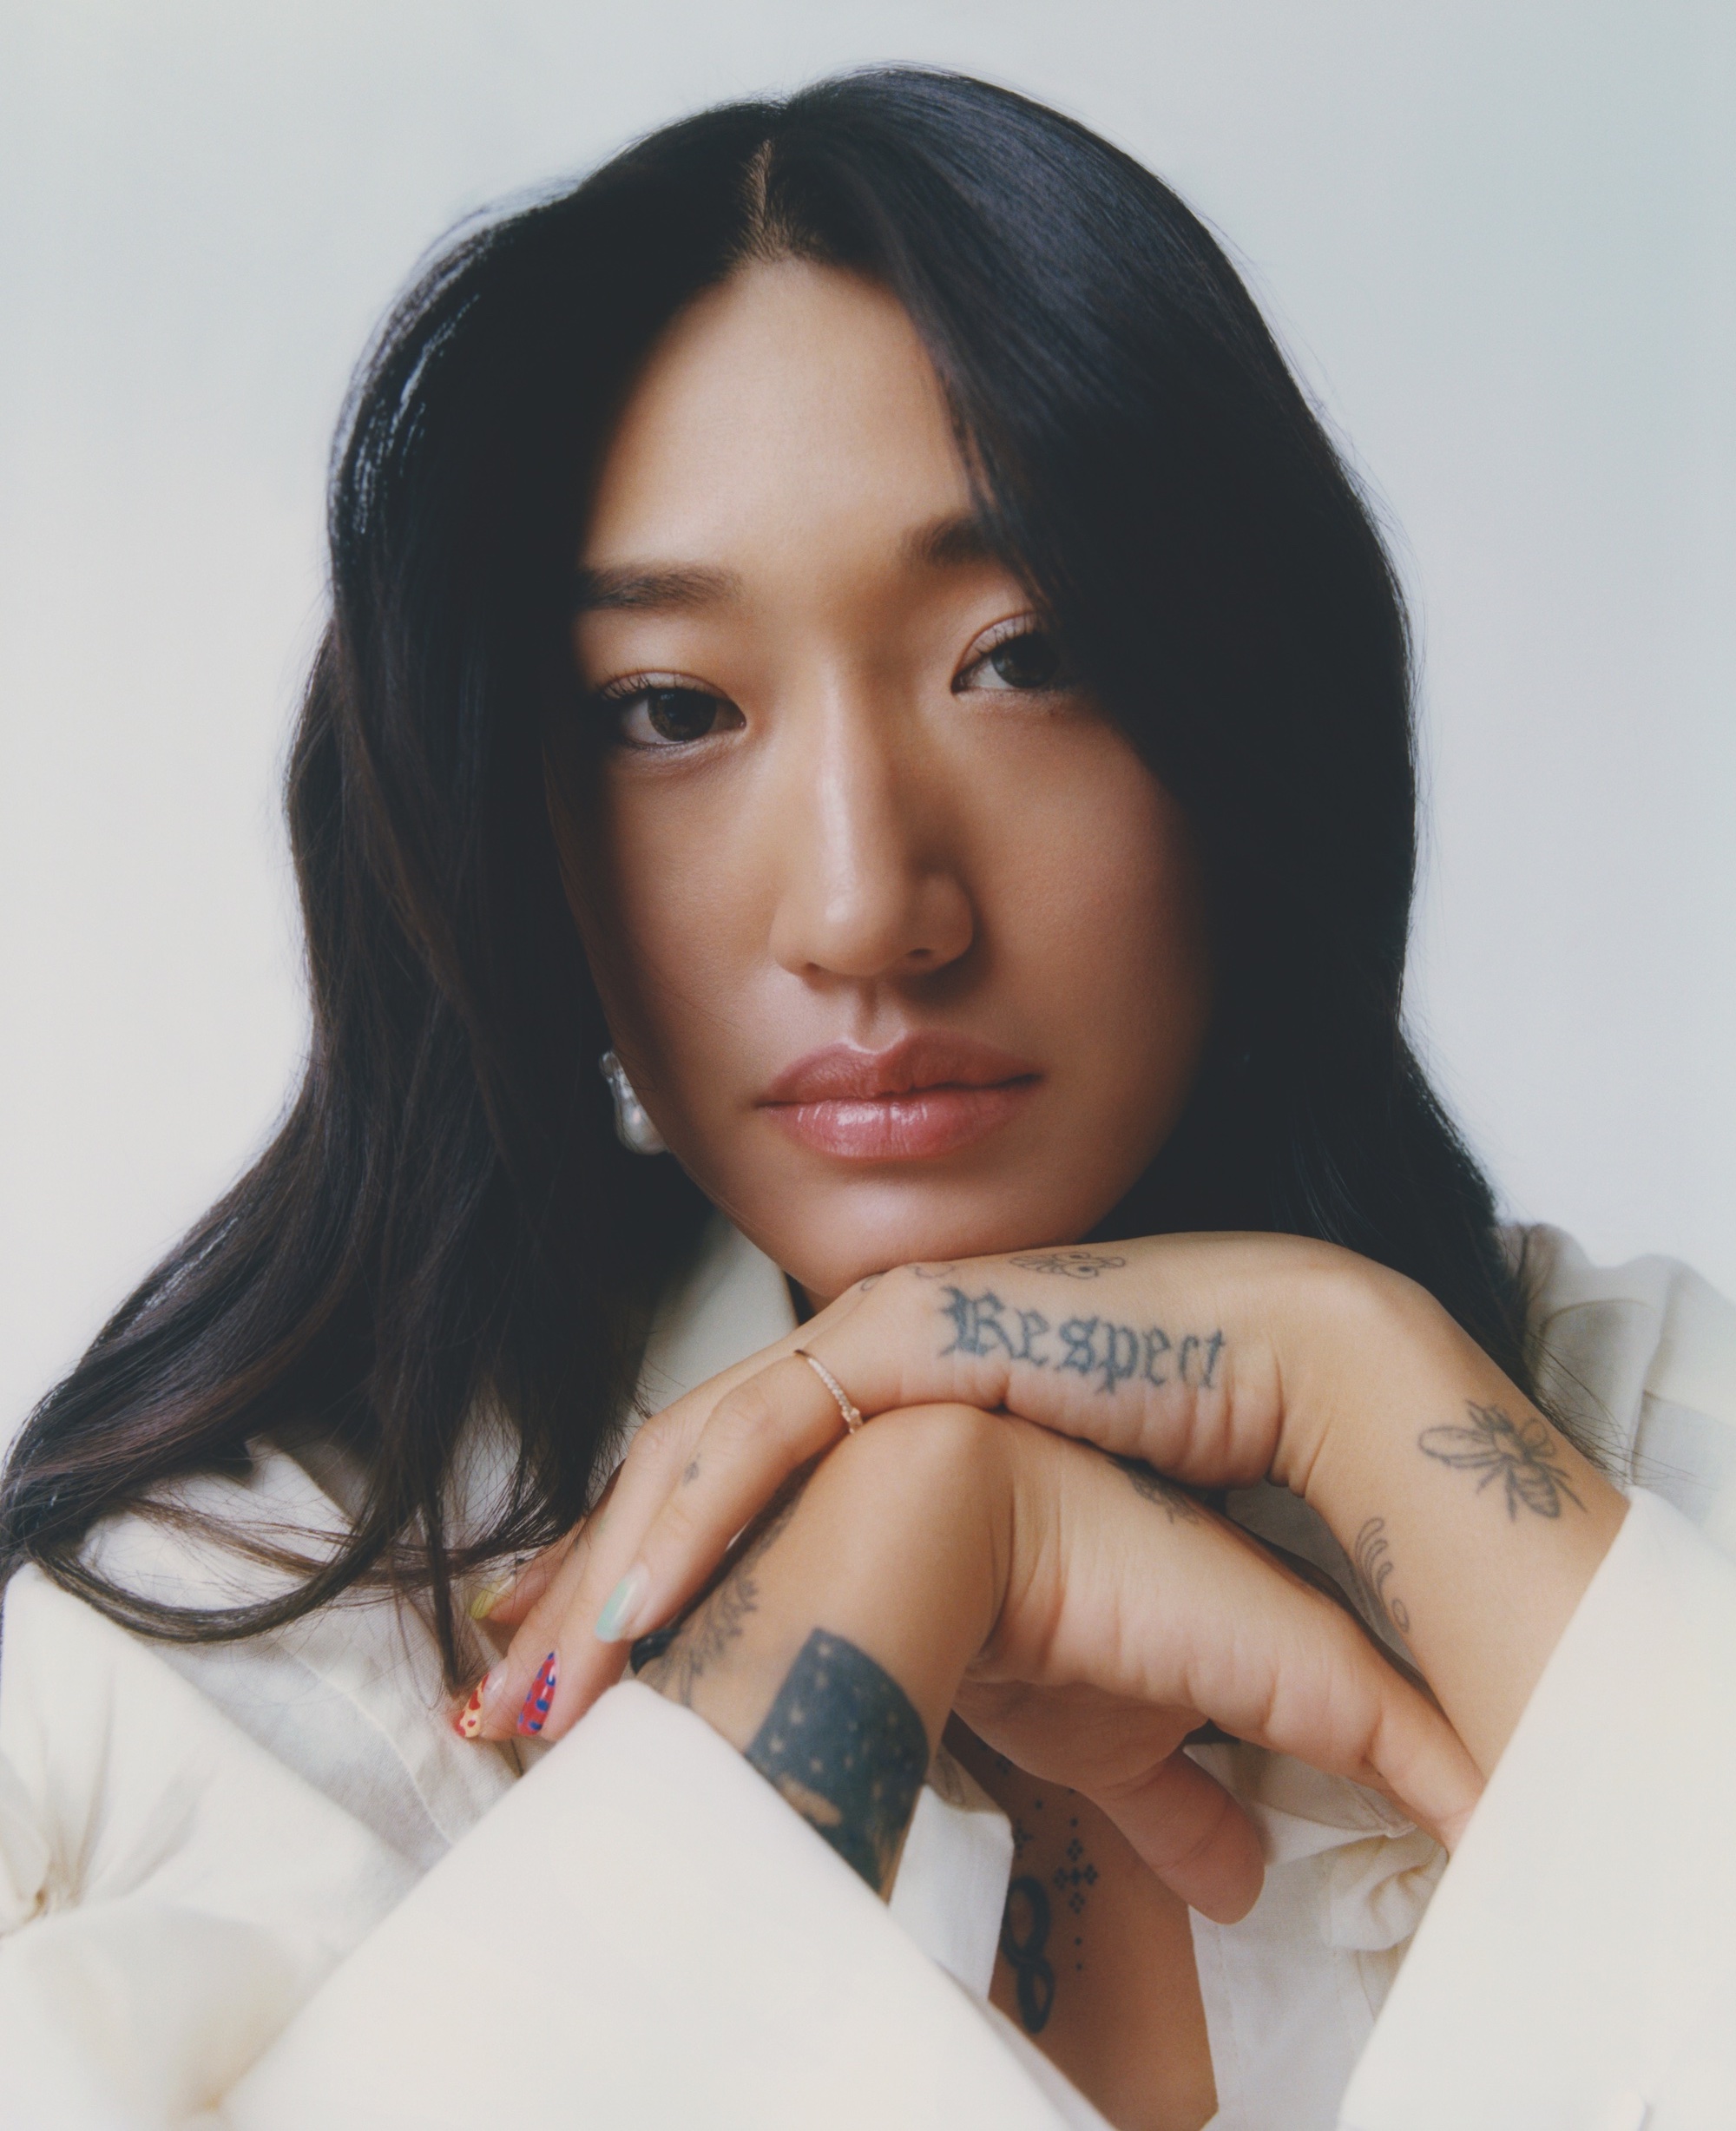 SS22 Trend: How Peggy Gou Makes Highlighter Hues Look Good